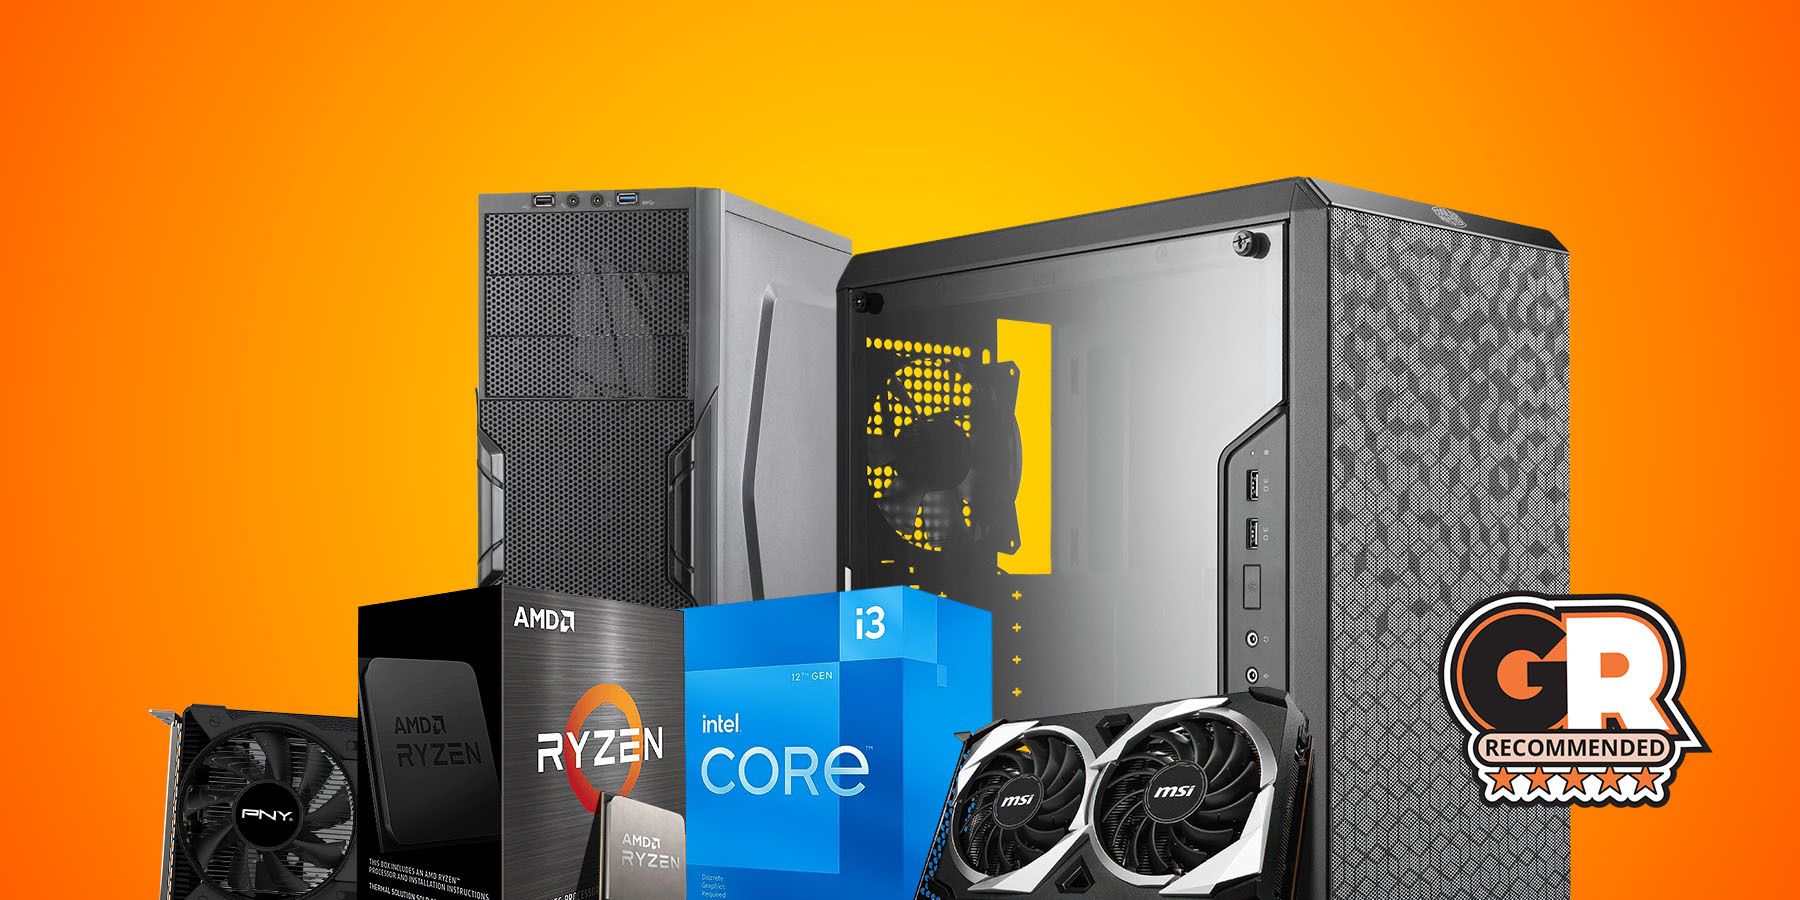 800 Euro PC for gaming or office